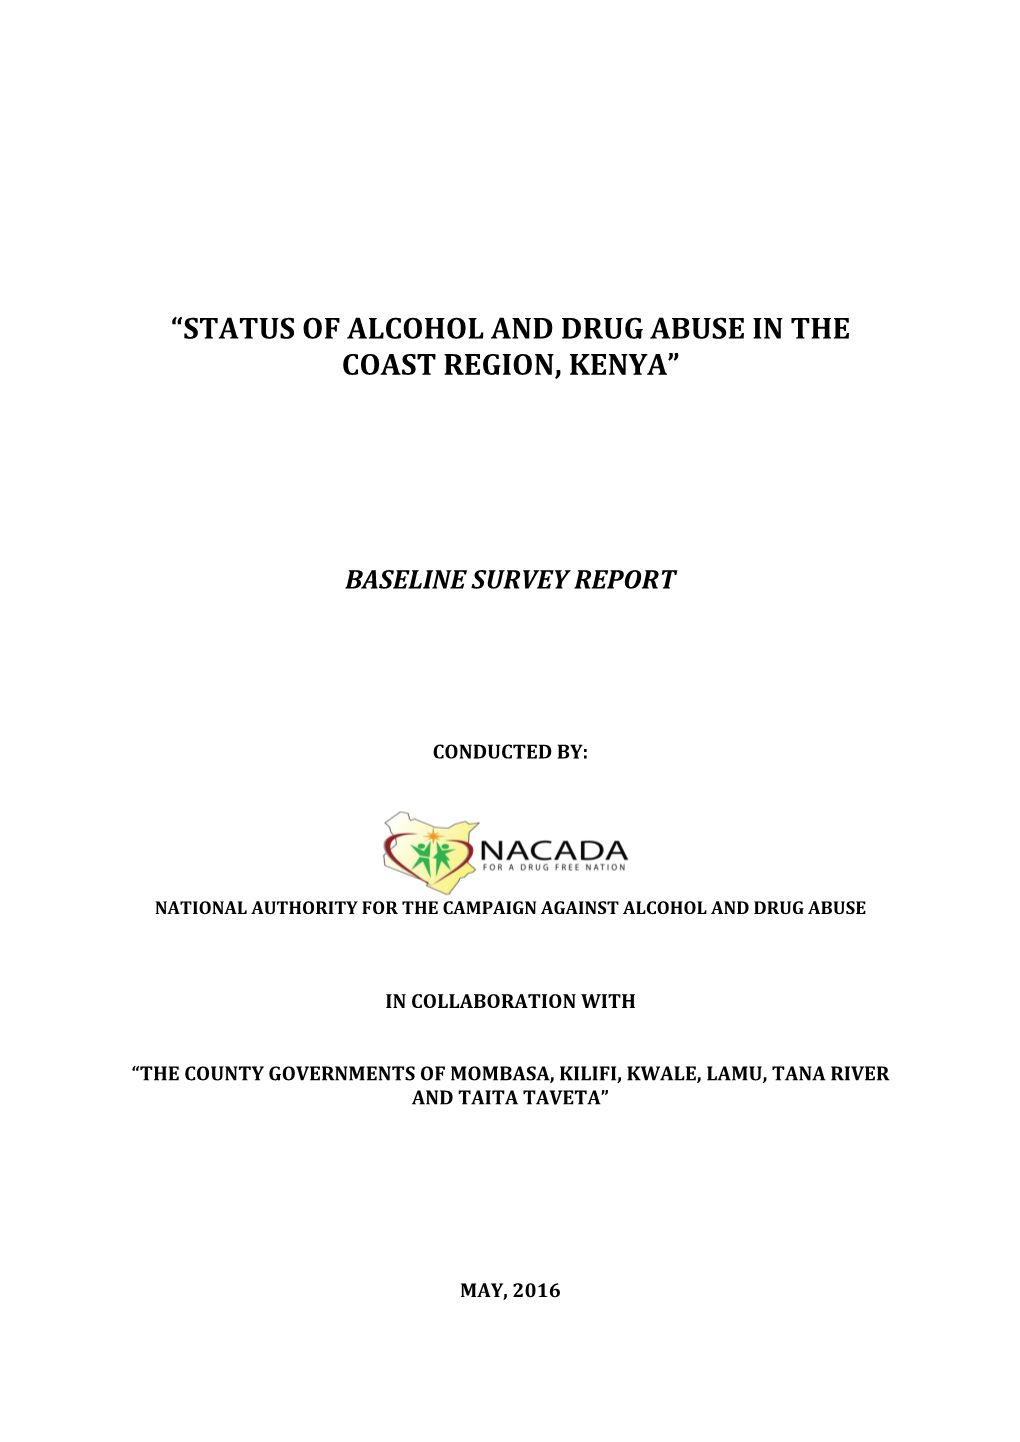 “Status of Alcohol and Drug Abuse in the Coast Region, Kenya”